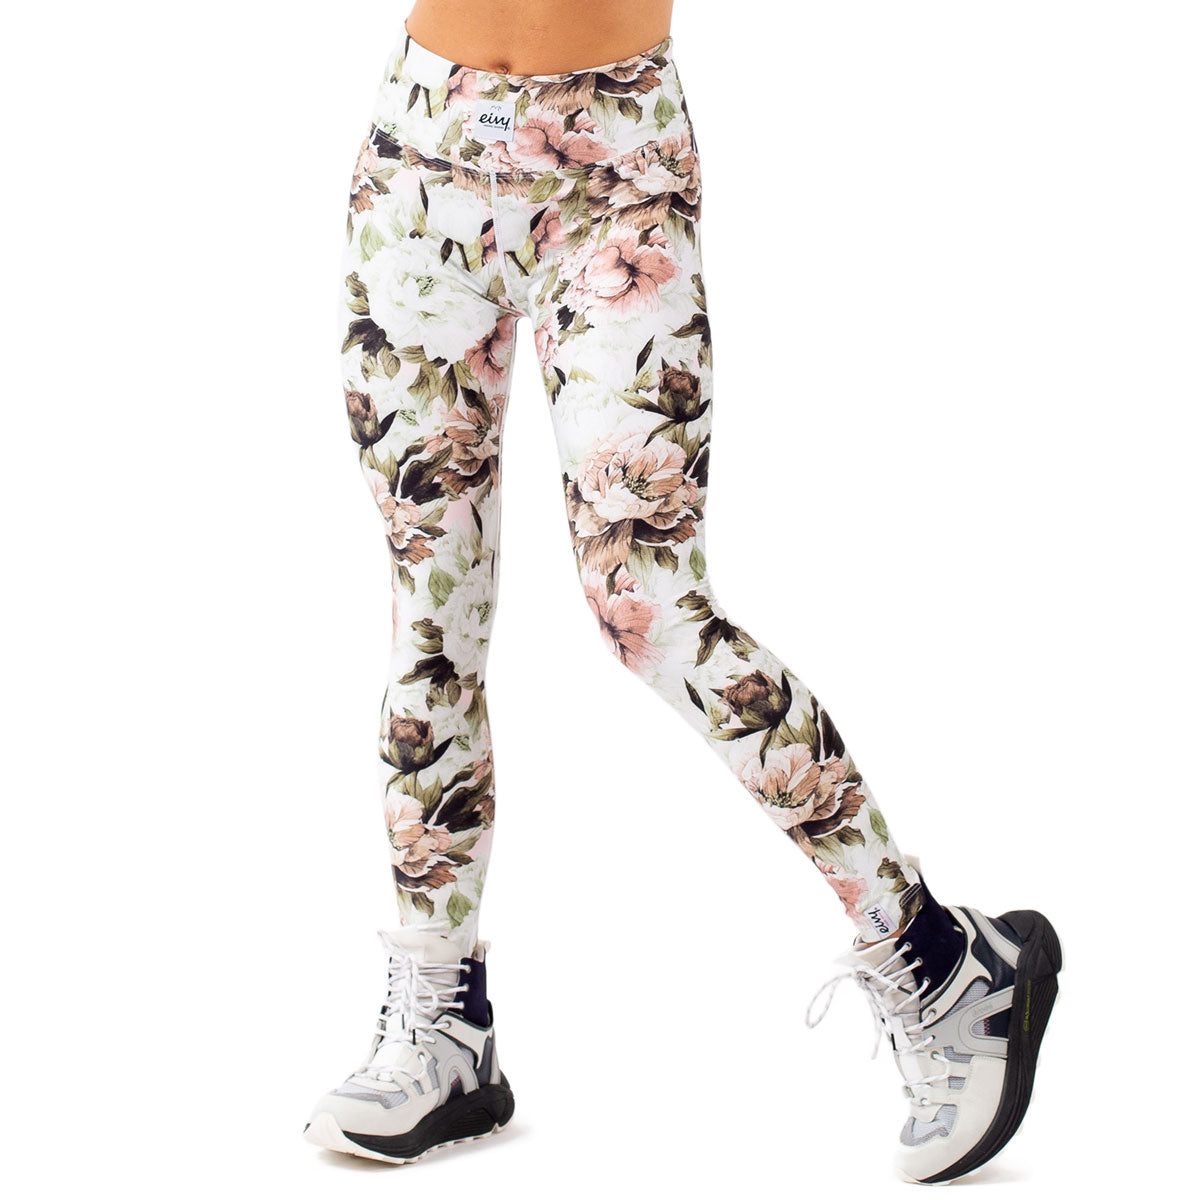 Eivy Icecold Tights Snowboard Base Layer - Bloom image 4